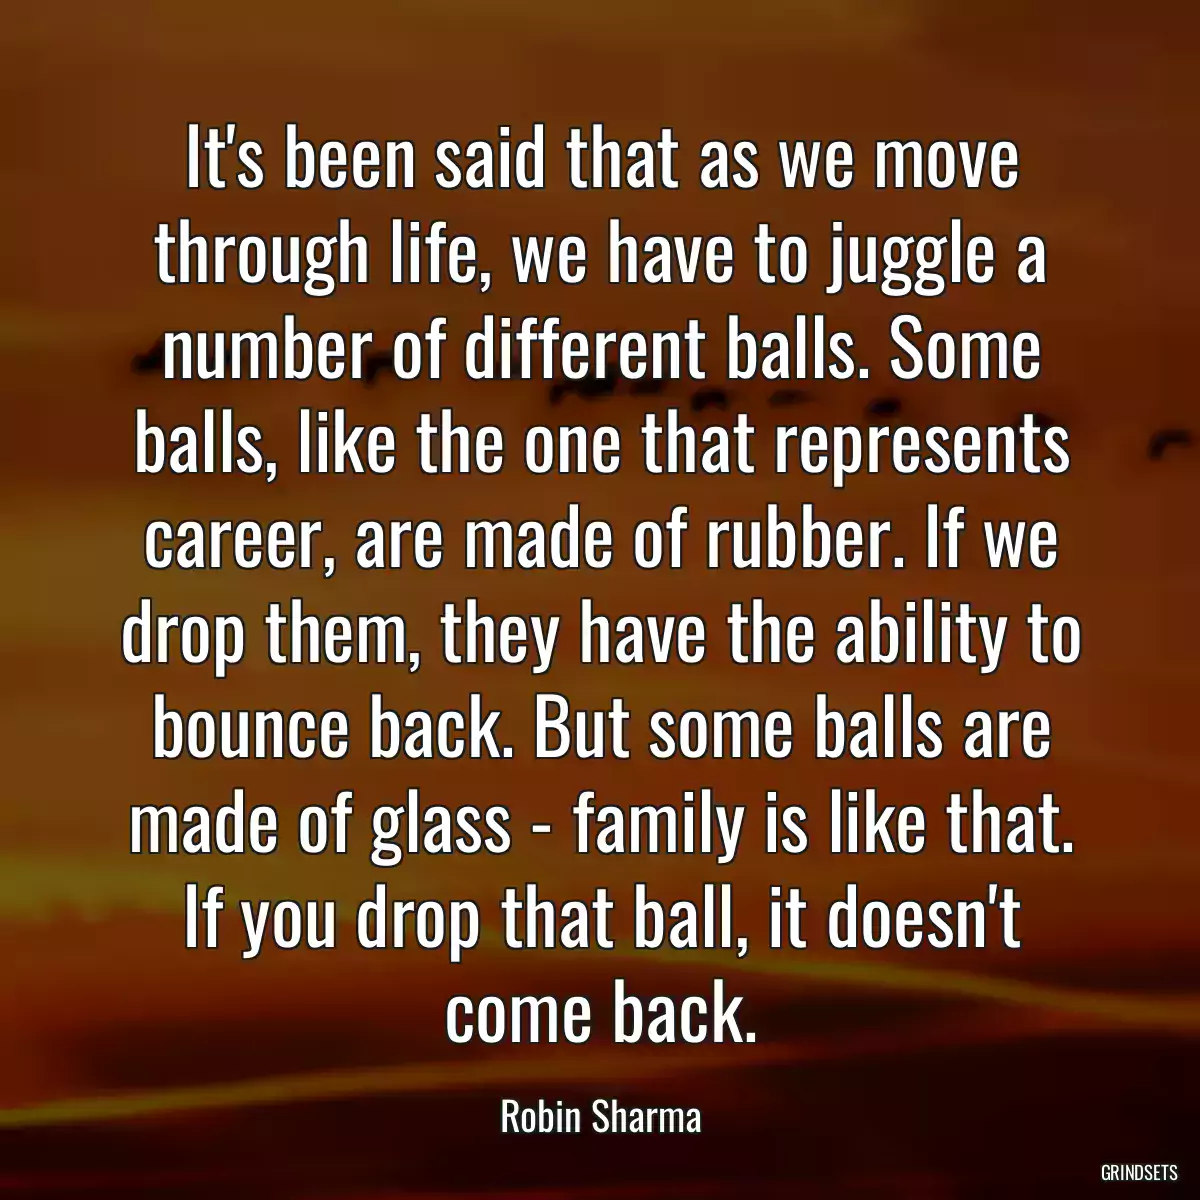 It\'s been said that as we move through life, we have to juggle a number of different balls. Some balls, like the one that represents career, are made of rubber. If we drop them, they have the ability to bounce back. But some balls are made of glass - family is like that. If you drop that ball, it doesn\'t come back.